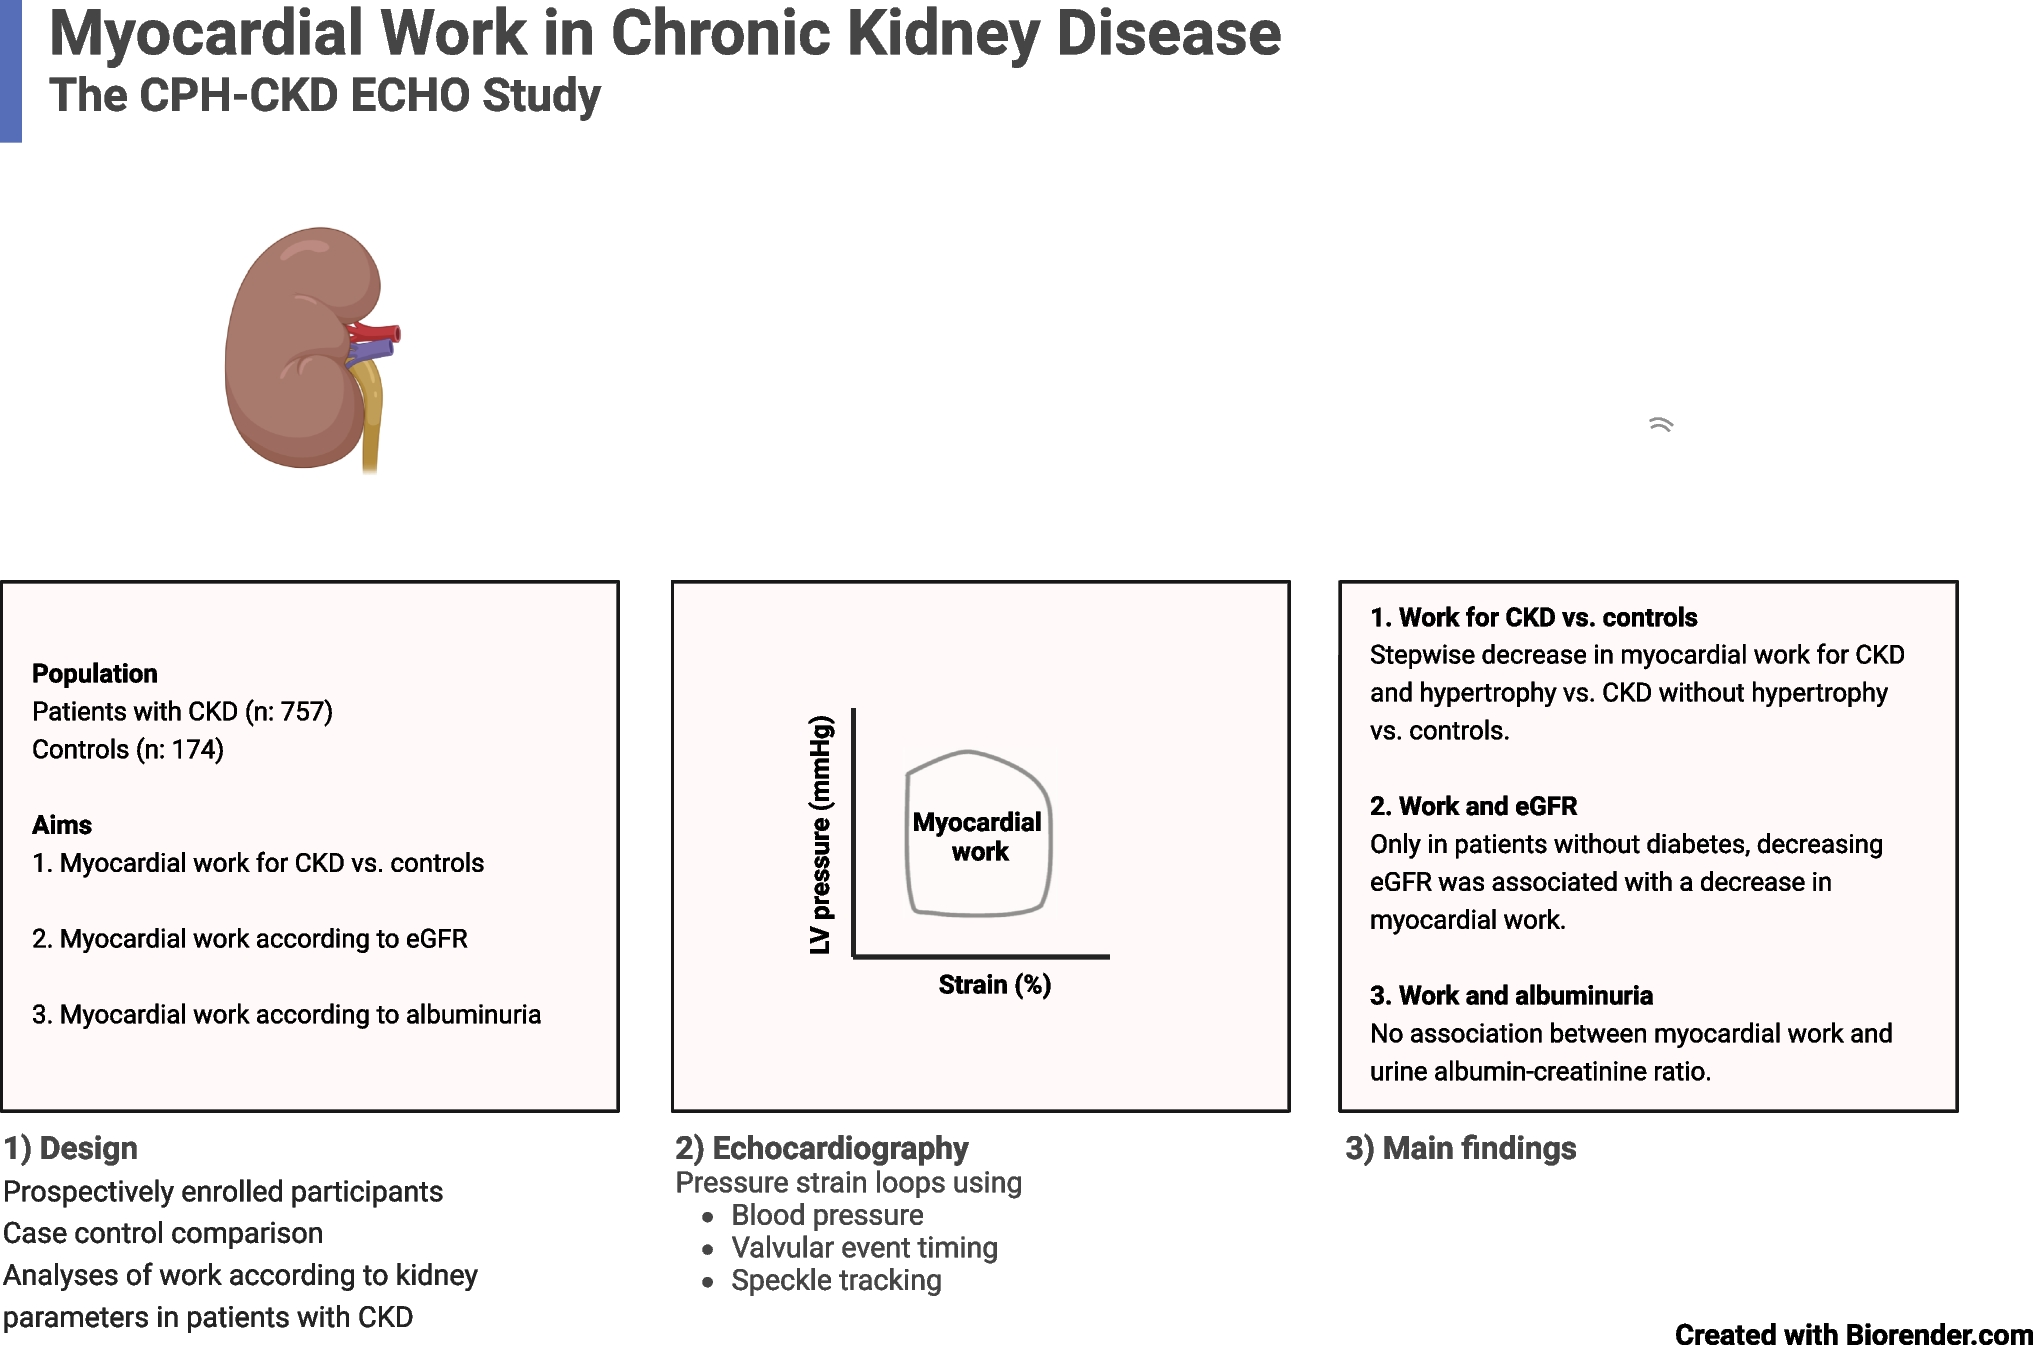 Myocardial work in chronic kidney disease: insights from the CPH-CKD ECHO Study